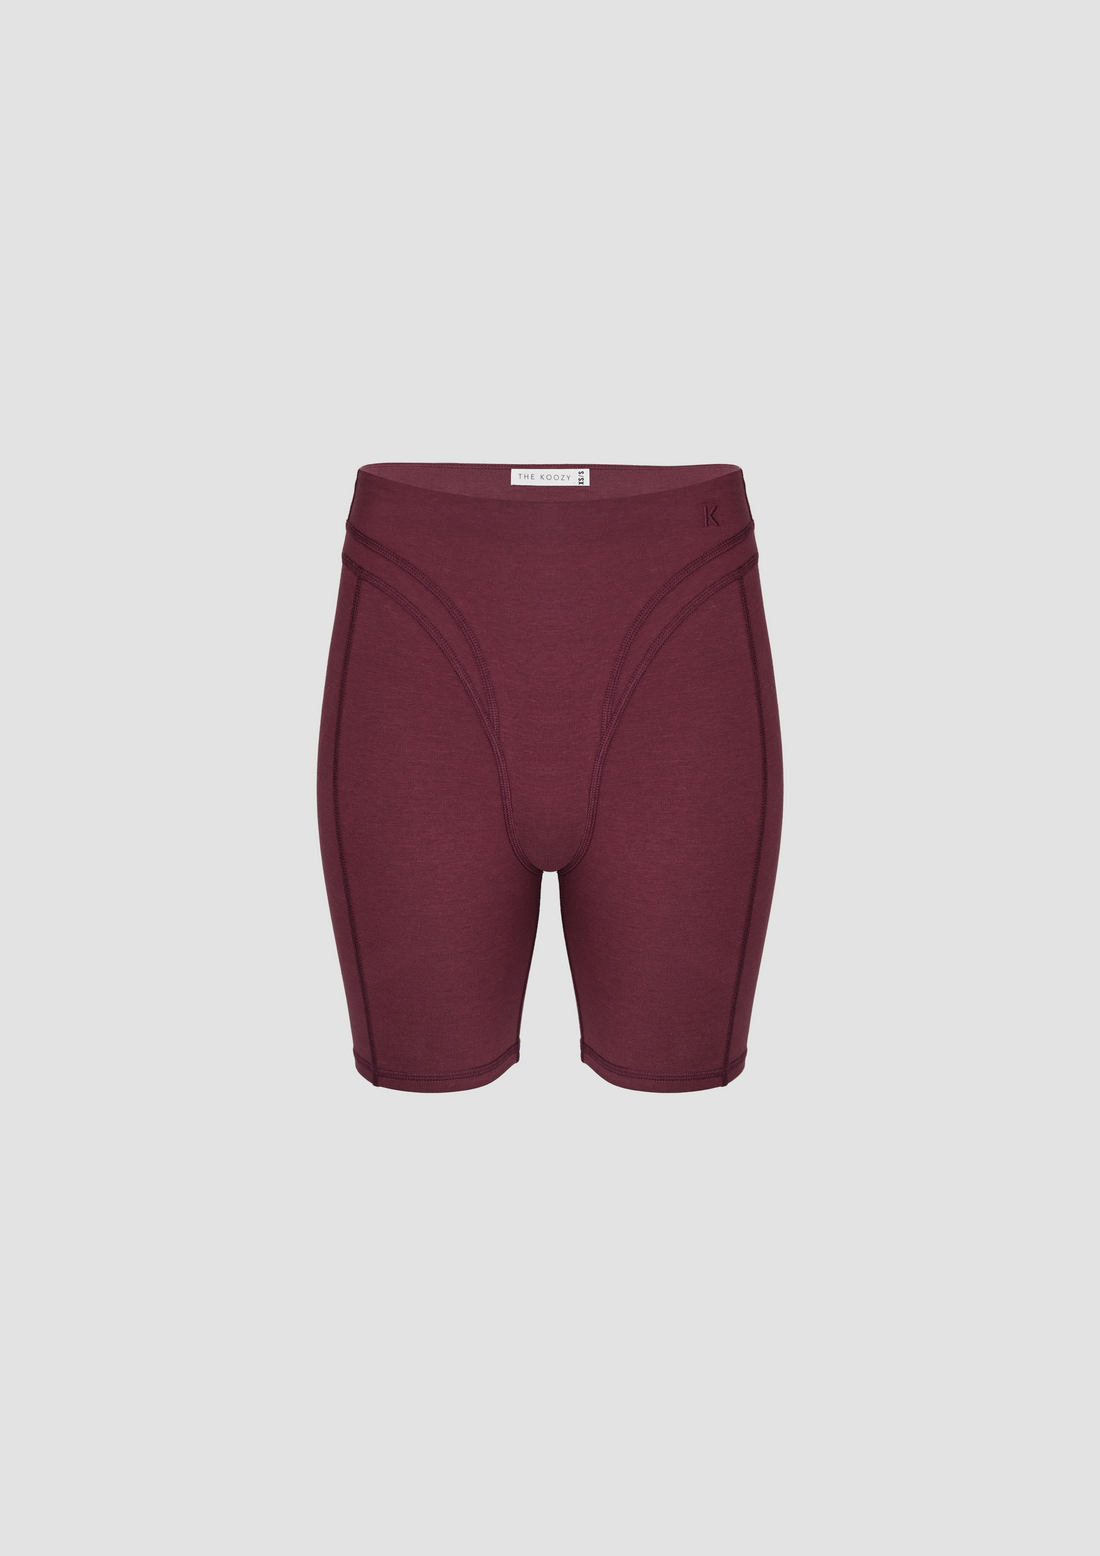 Monroe Stretch Shorts in TENCEL™ Lyocell and Organic Cotton in Burgundy